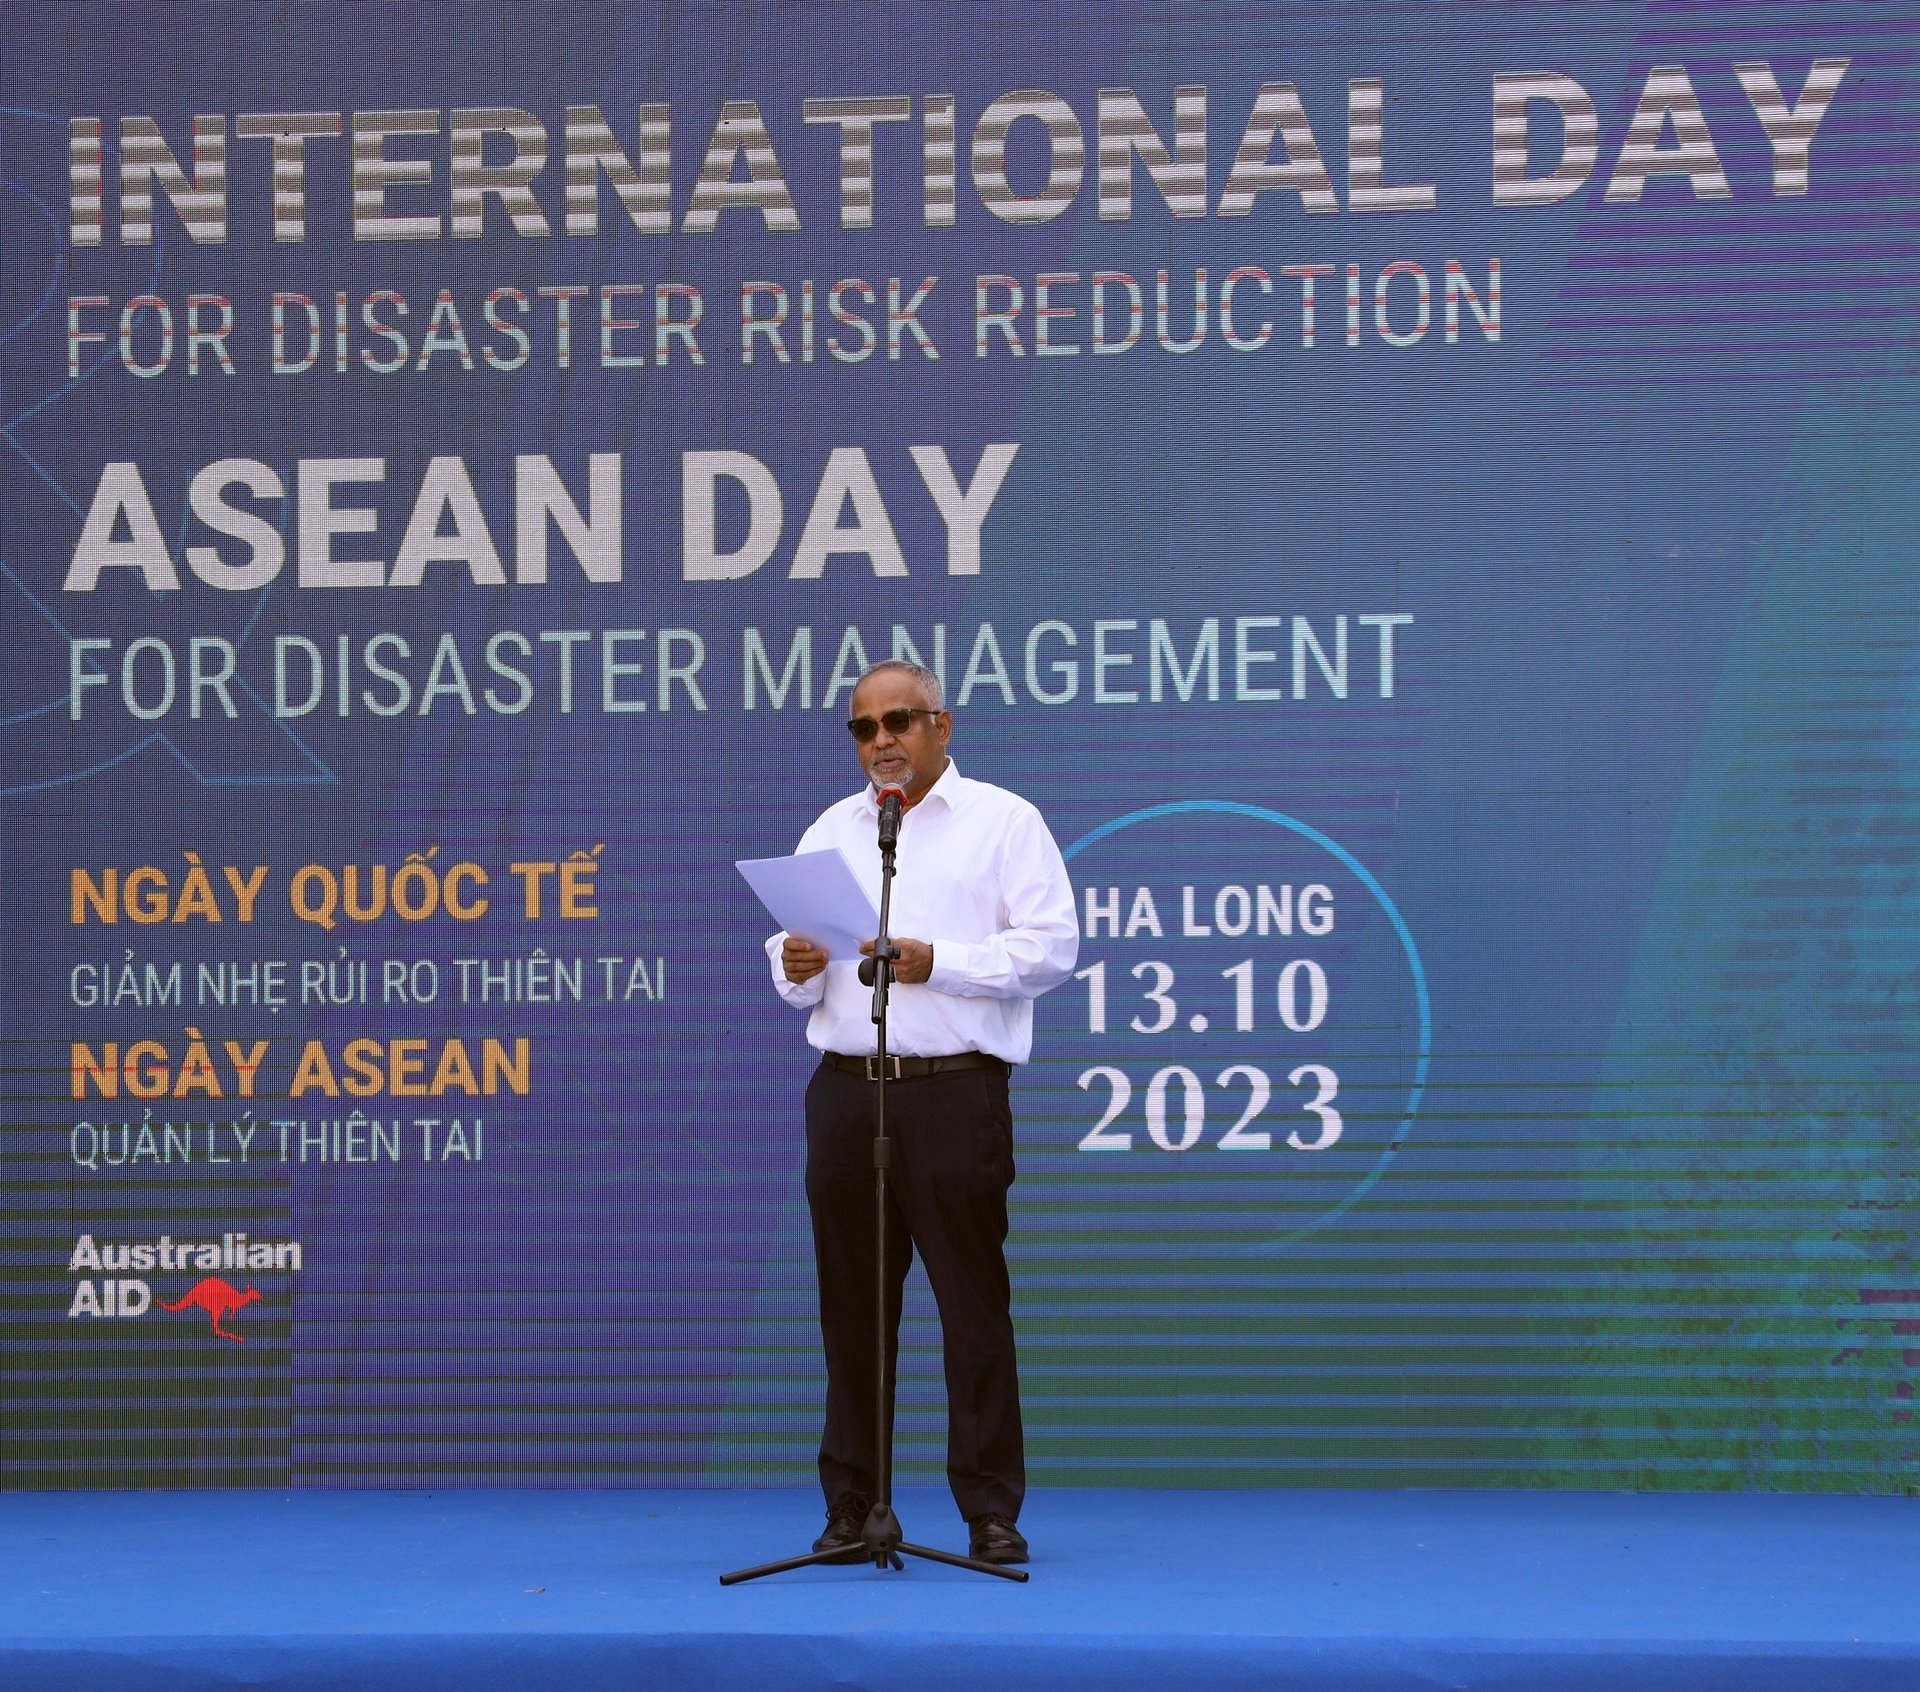 Mr. Shantanu Chakraborty, Country Director of the Asian Development Bank and co-chair of the Disaster Risk Reduction Partnership, speaks at the ceremony. Photo: Nguyen Thanh.